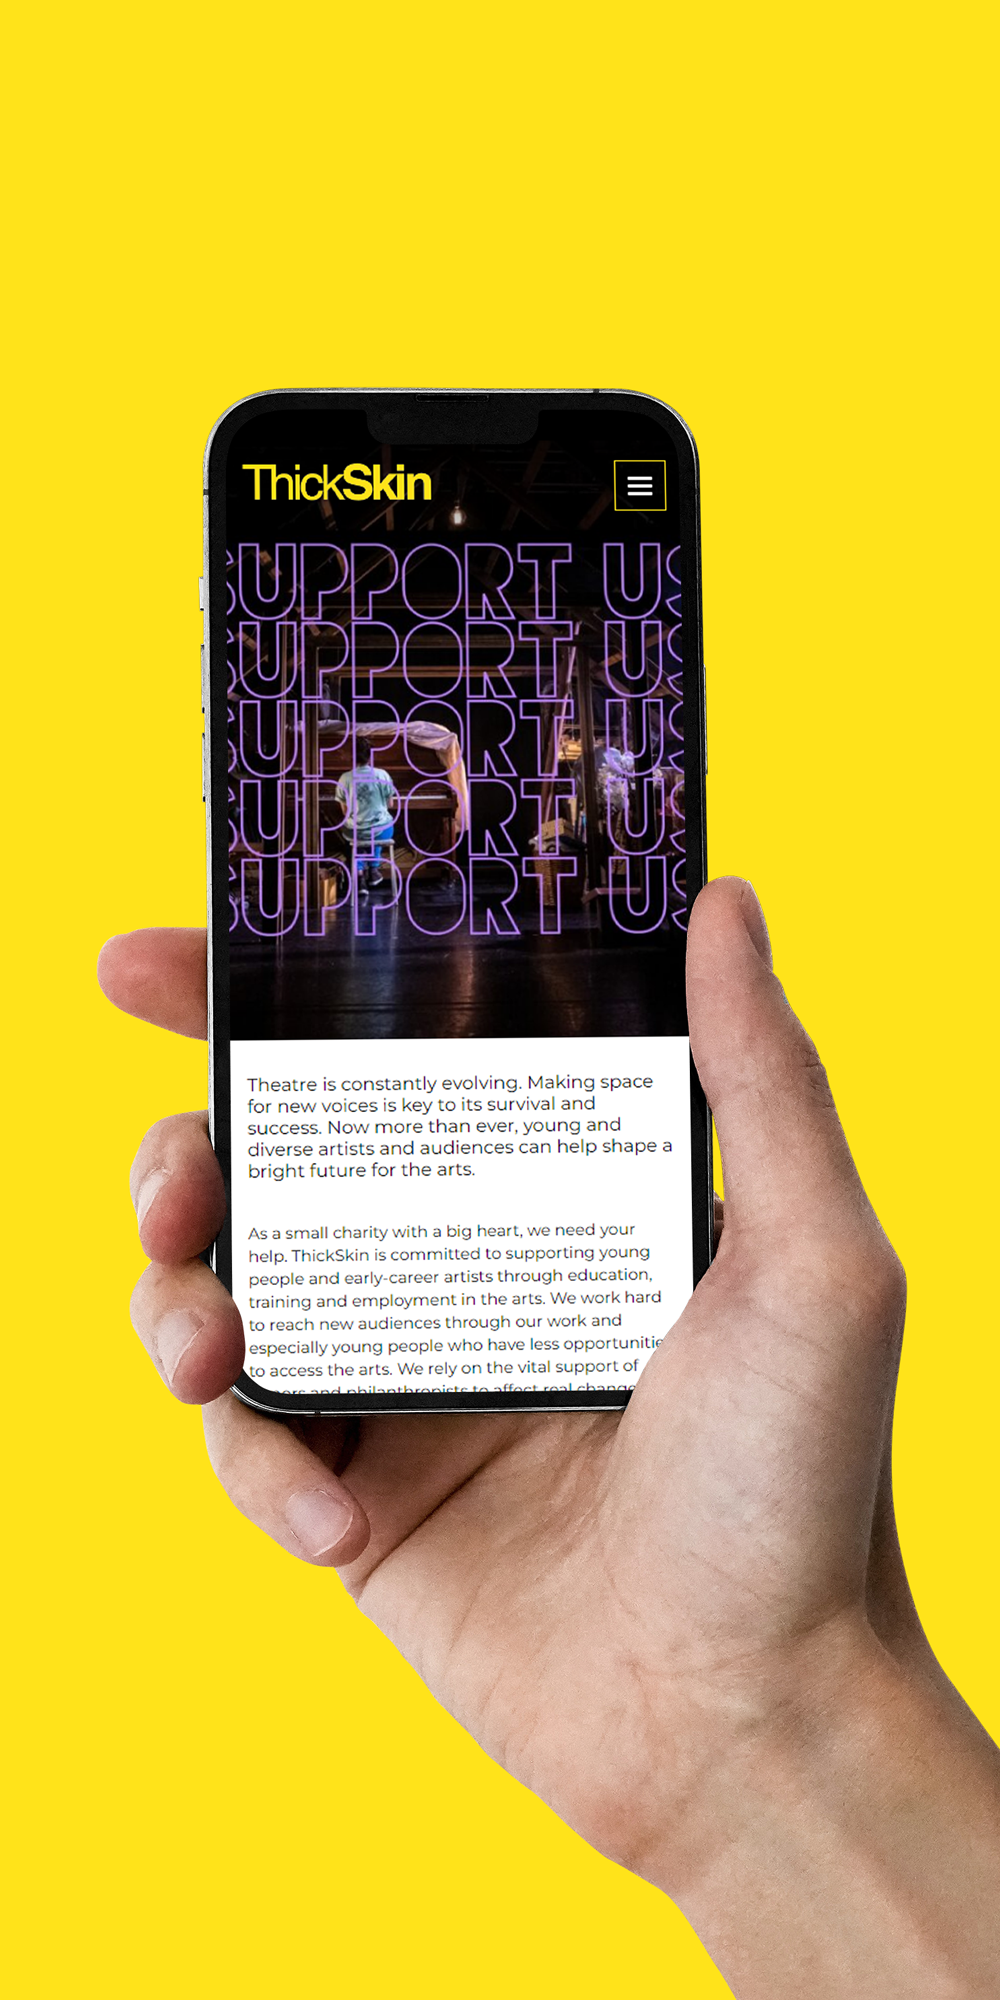 ThickSkin support us page shown on a phone screen